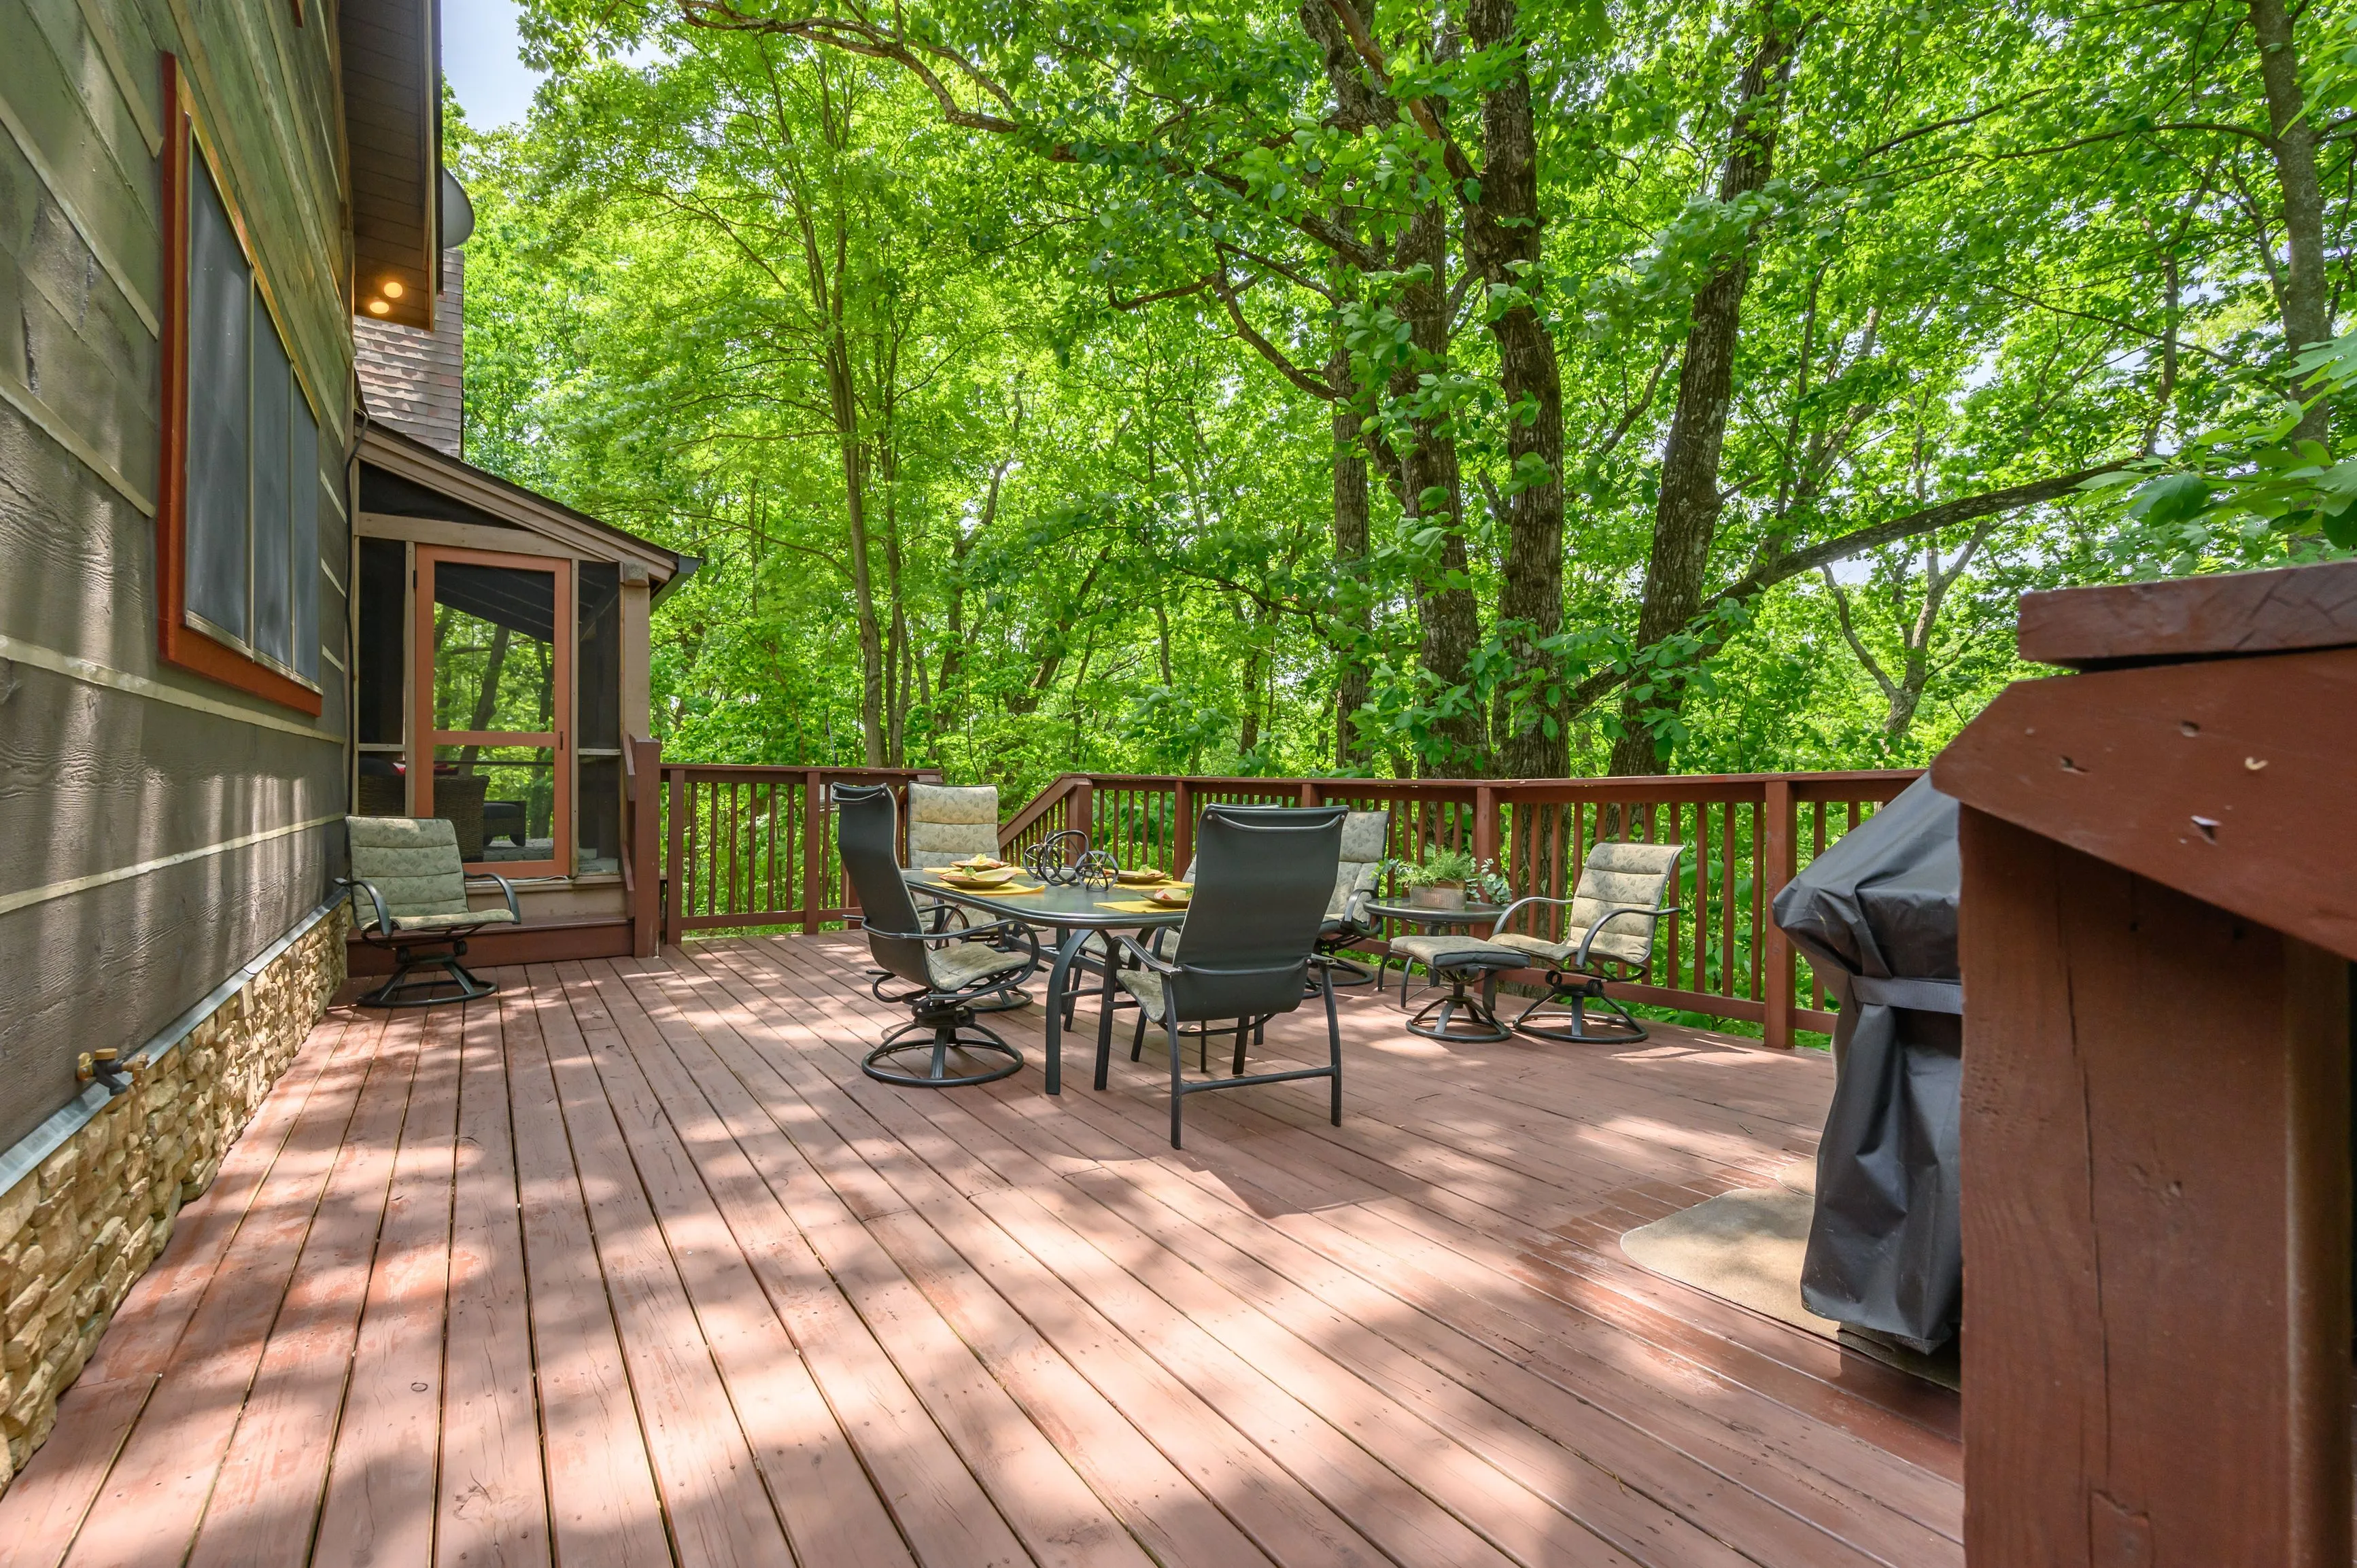 Spacious wooden deck with outdoor furniture surrounded by lush green trees.